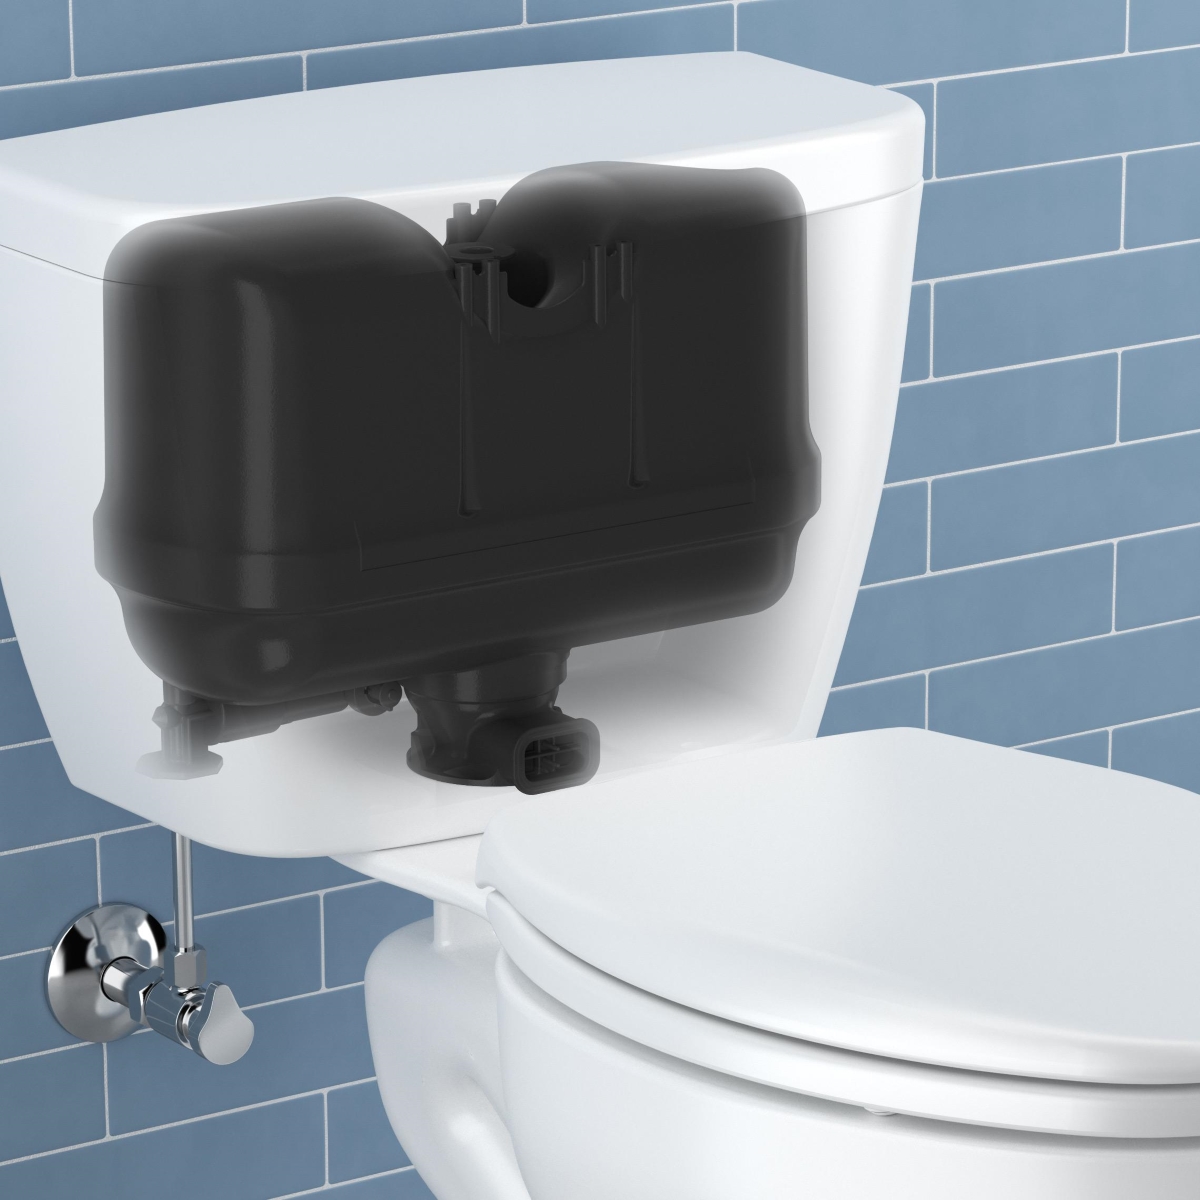 types of toilets - pressure assisted toilet